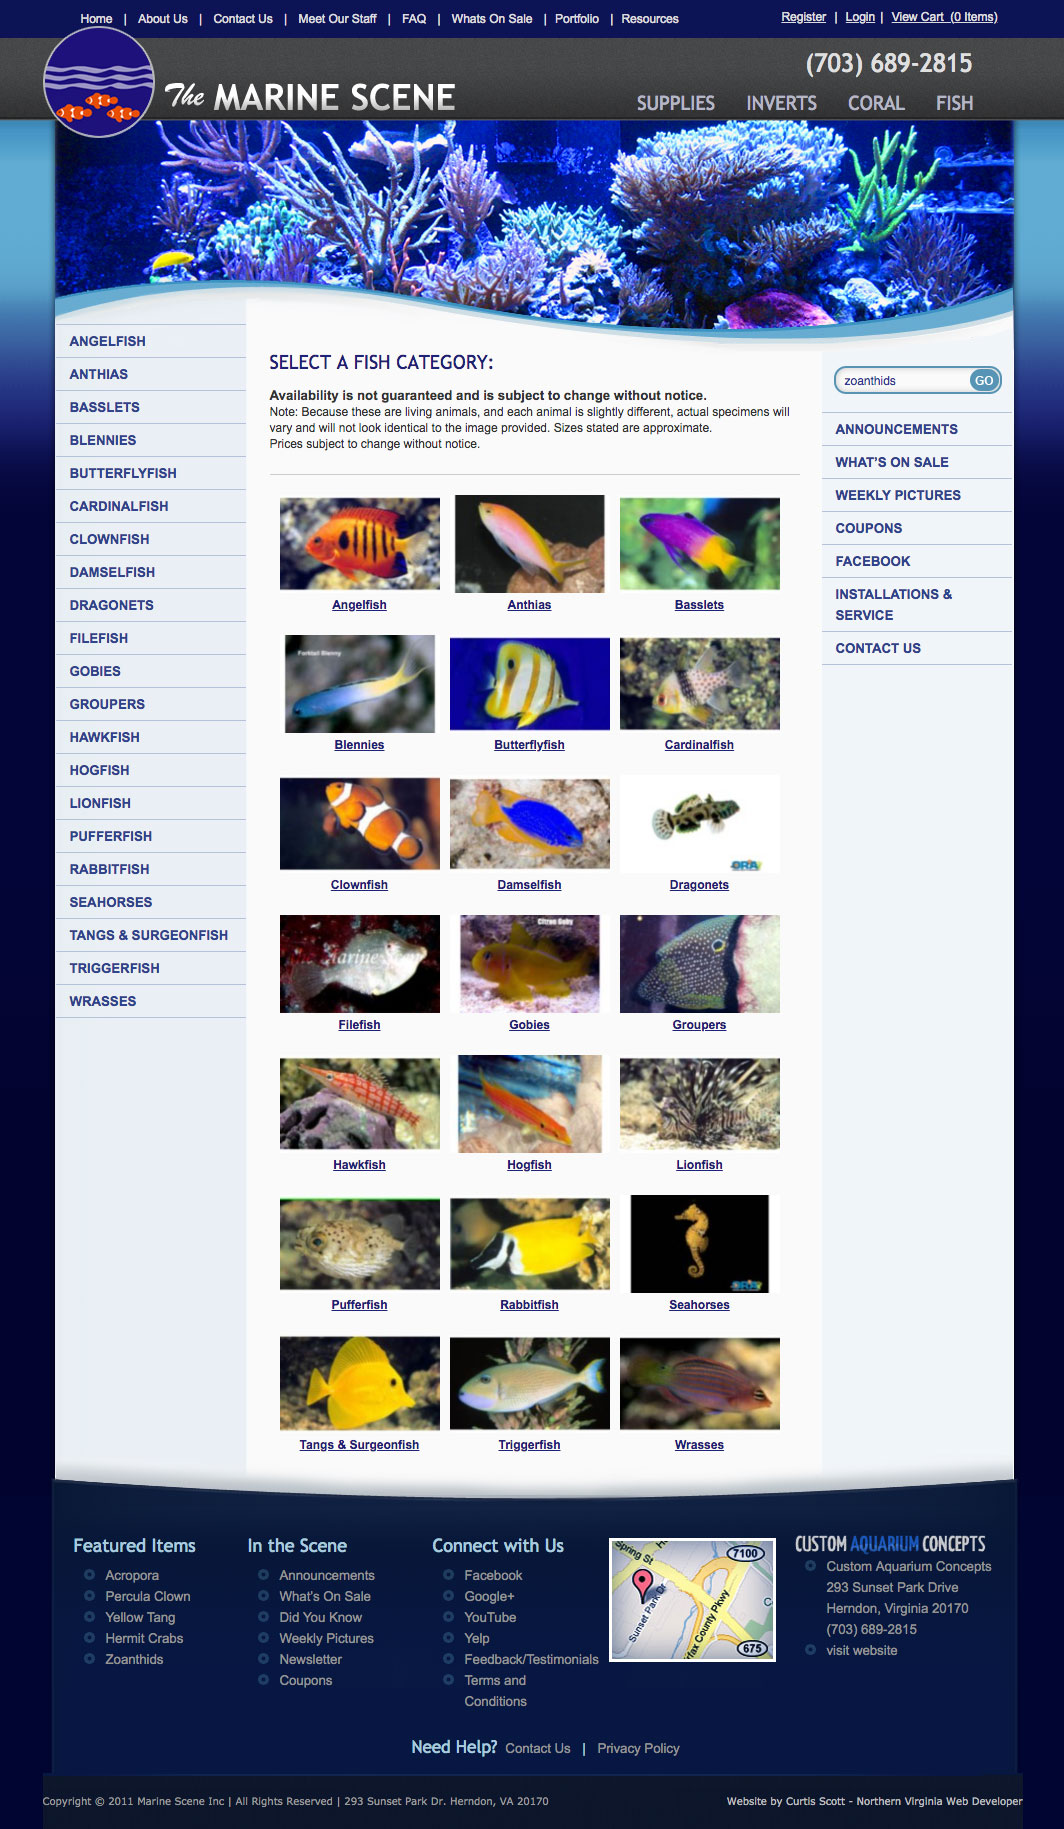 The Marine Scene UI design screenshot of the fish category page